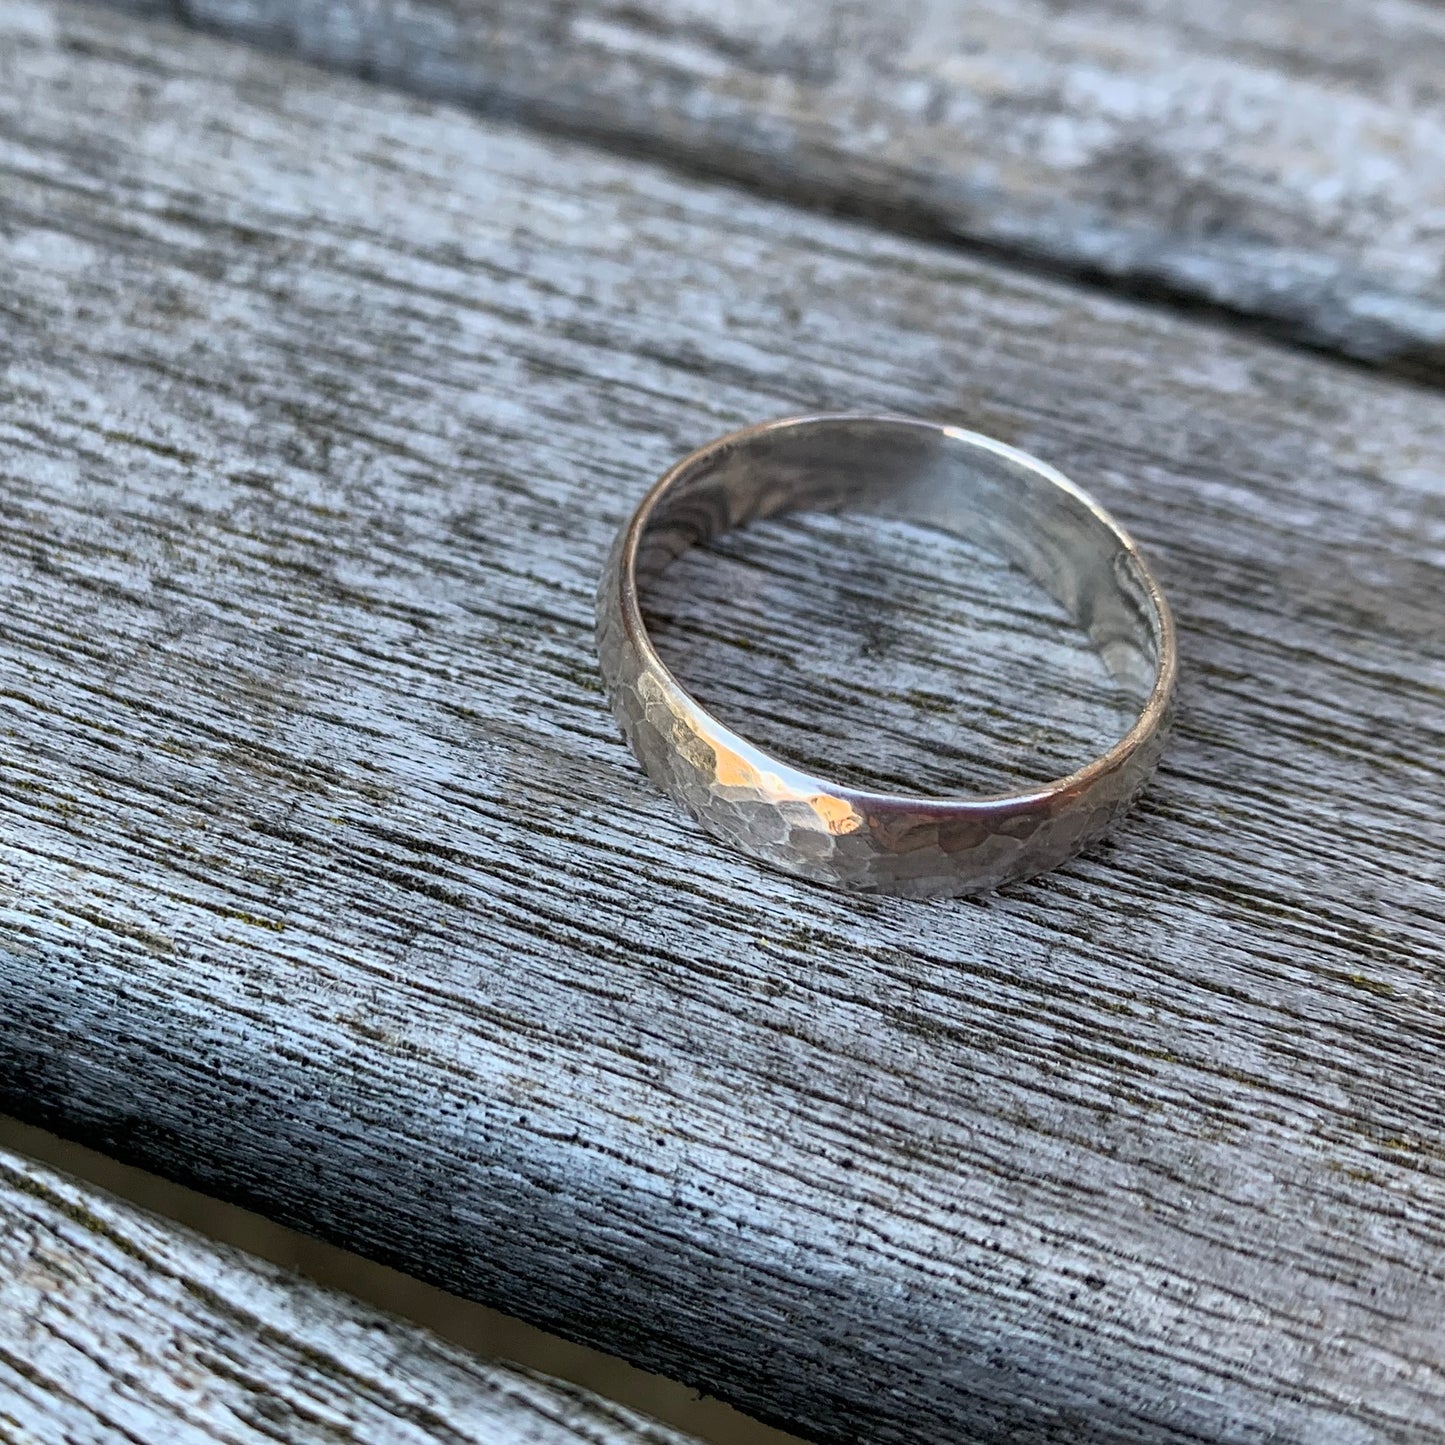 D-shaped ring with engraving